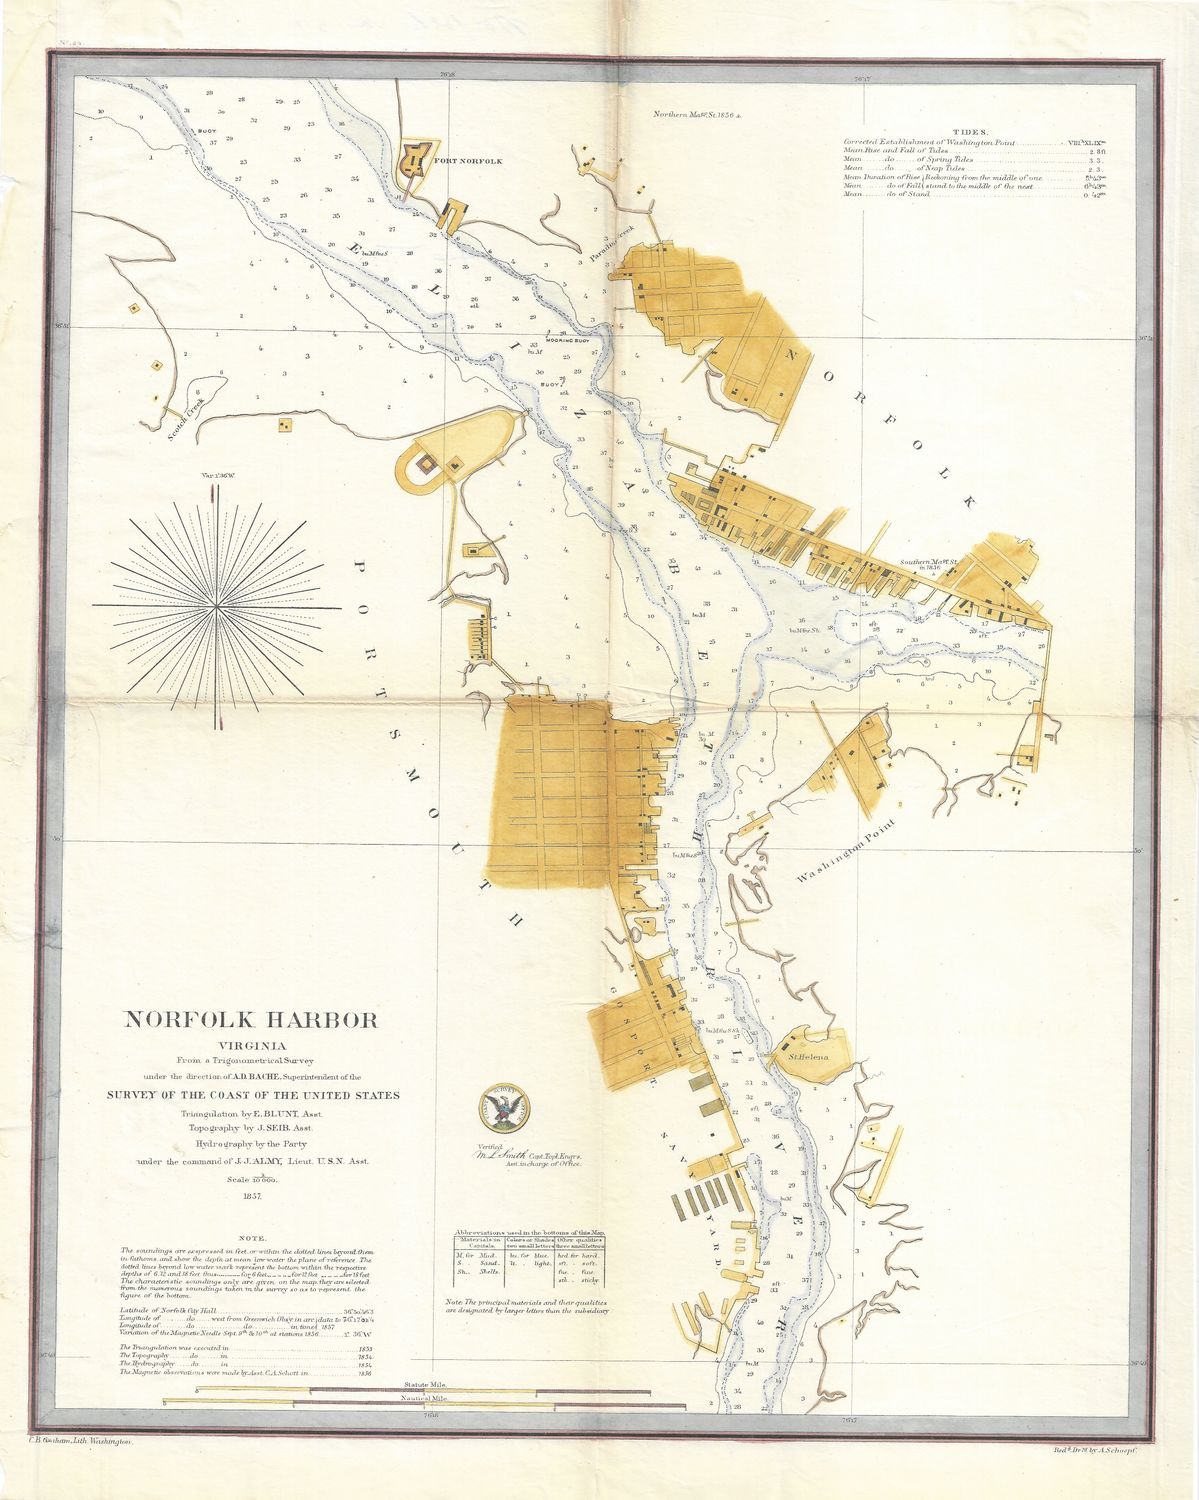 1857 Norfolk Harbor by the USCS as a Folding Folio in Lithography, as Congressional Documents w/ hand color